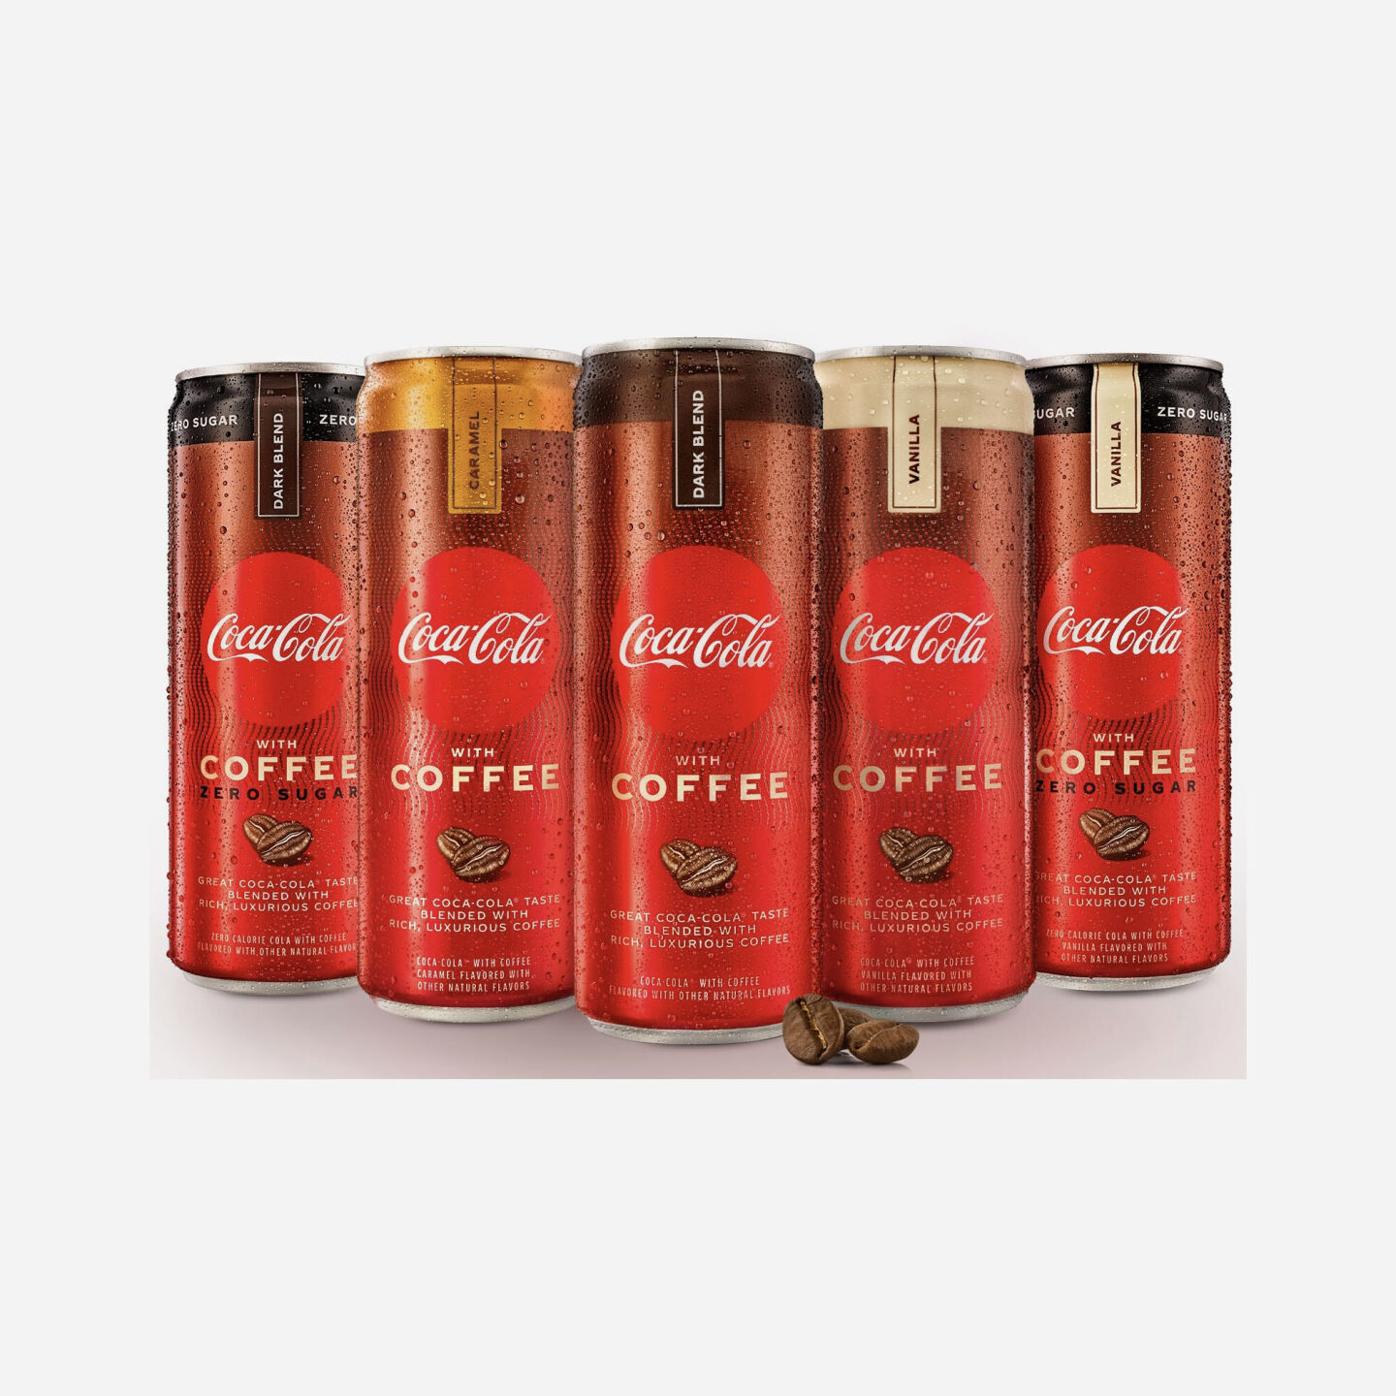 Coca-Cola thinks Americans are finally ready for Coke with coffee